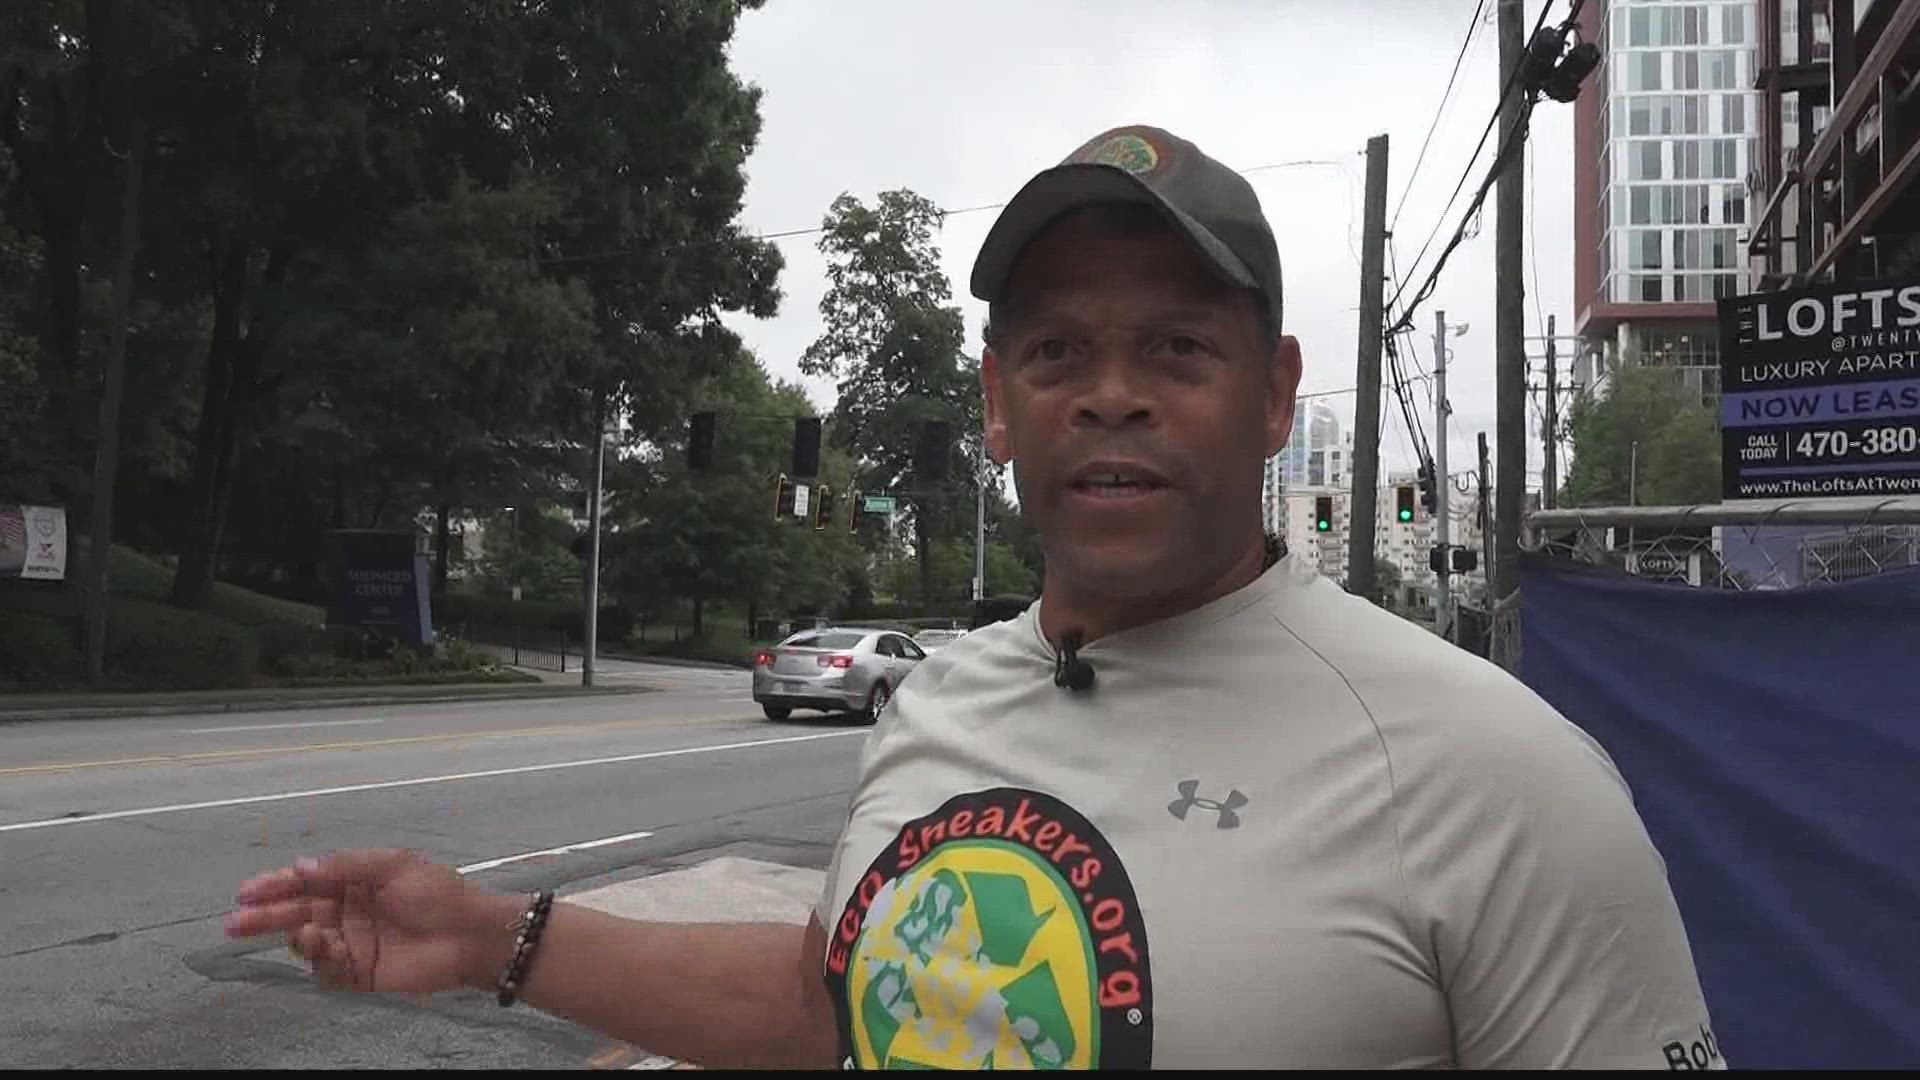 While training for the world's largest 10K, a sight along Peachtree Road inspired a man to give up his running shoes and started a 20-year journey of giving back.